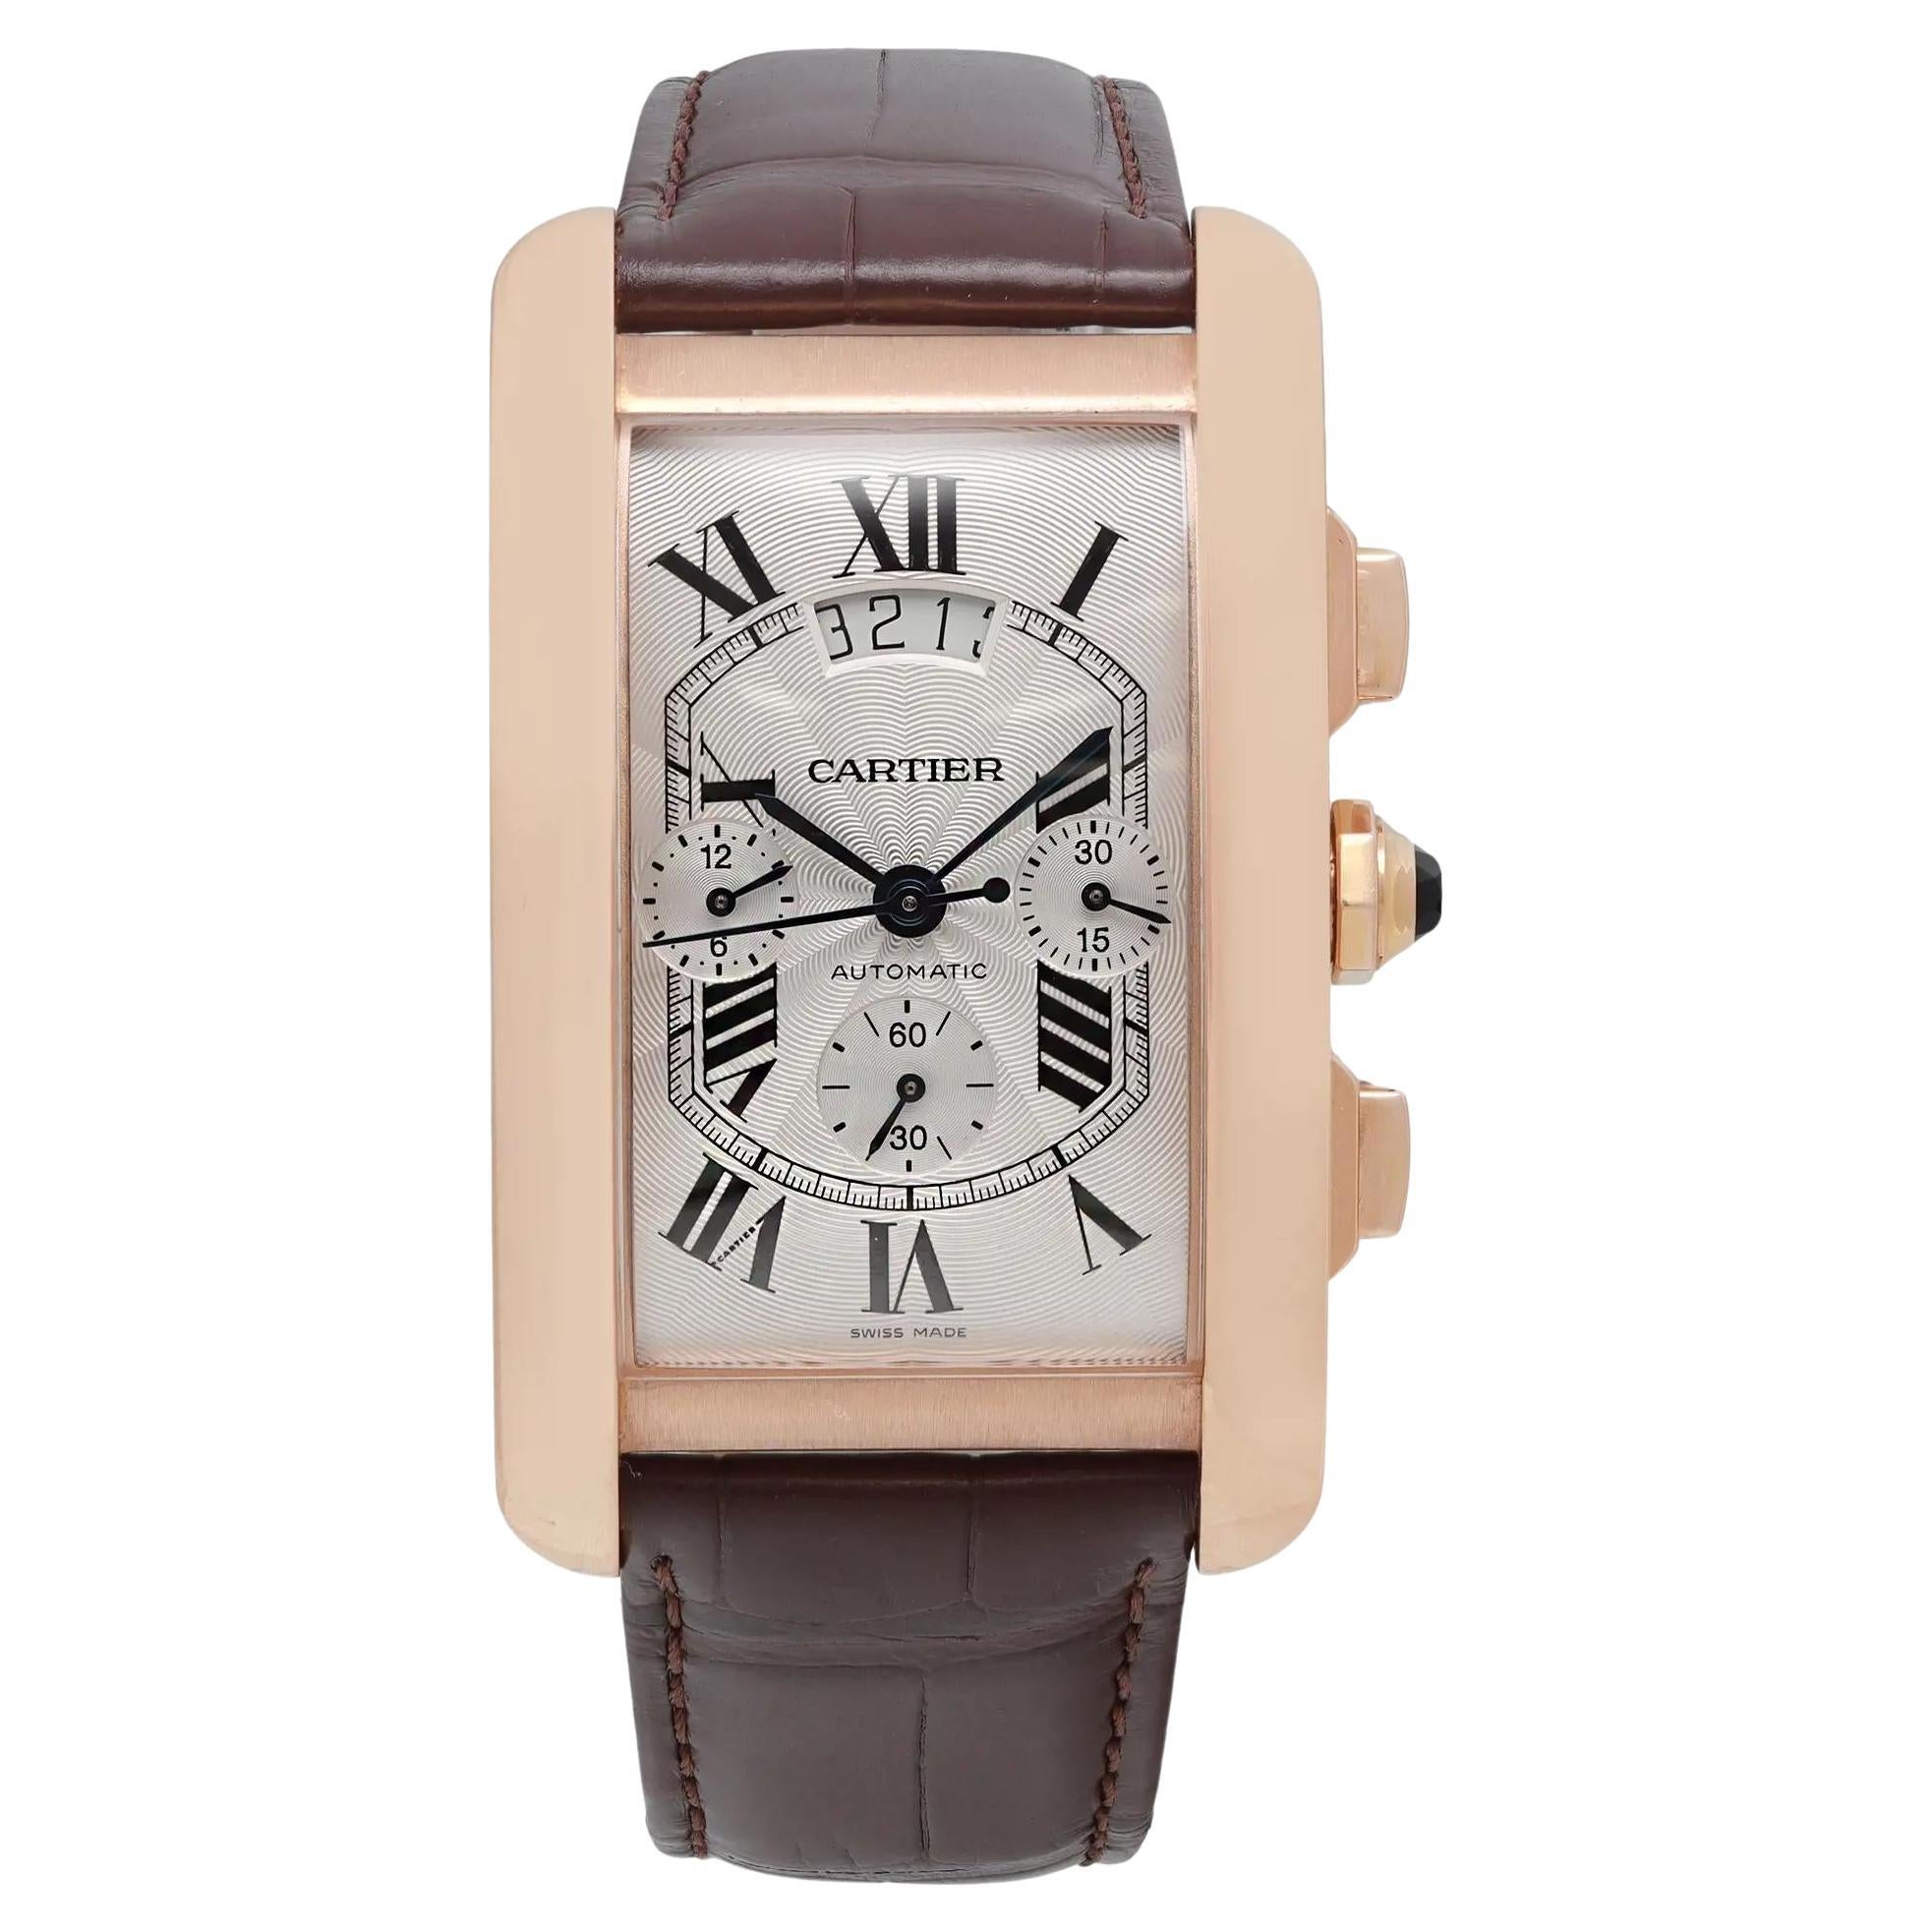 Cartier Tank Americaine XL 18k Rose Gold Silver Dial Automatic Watch W2610751